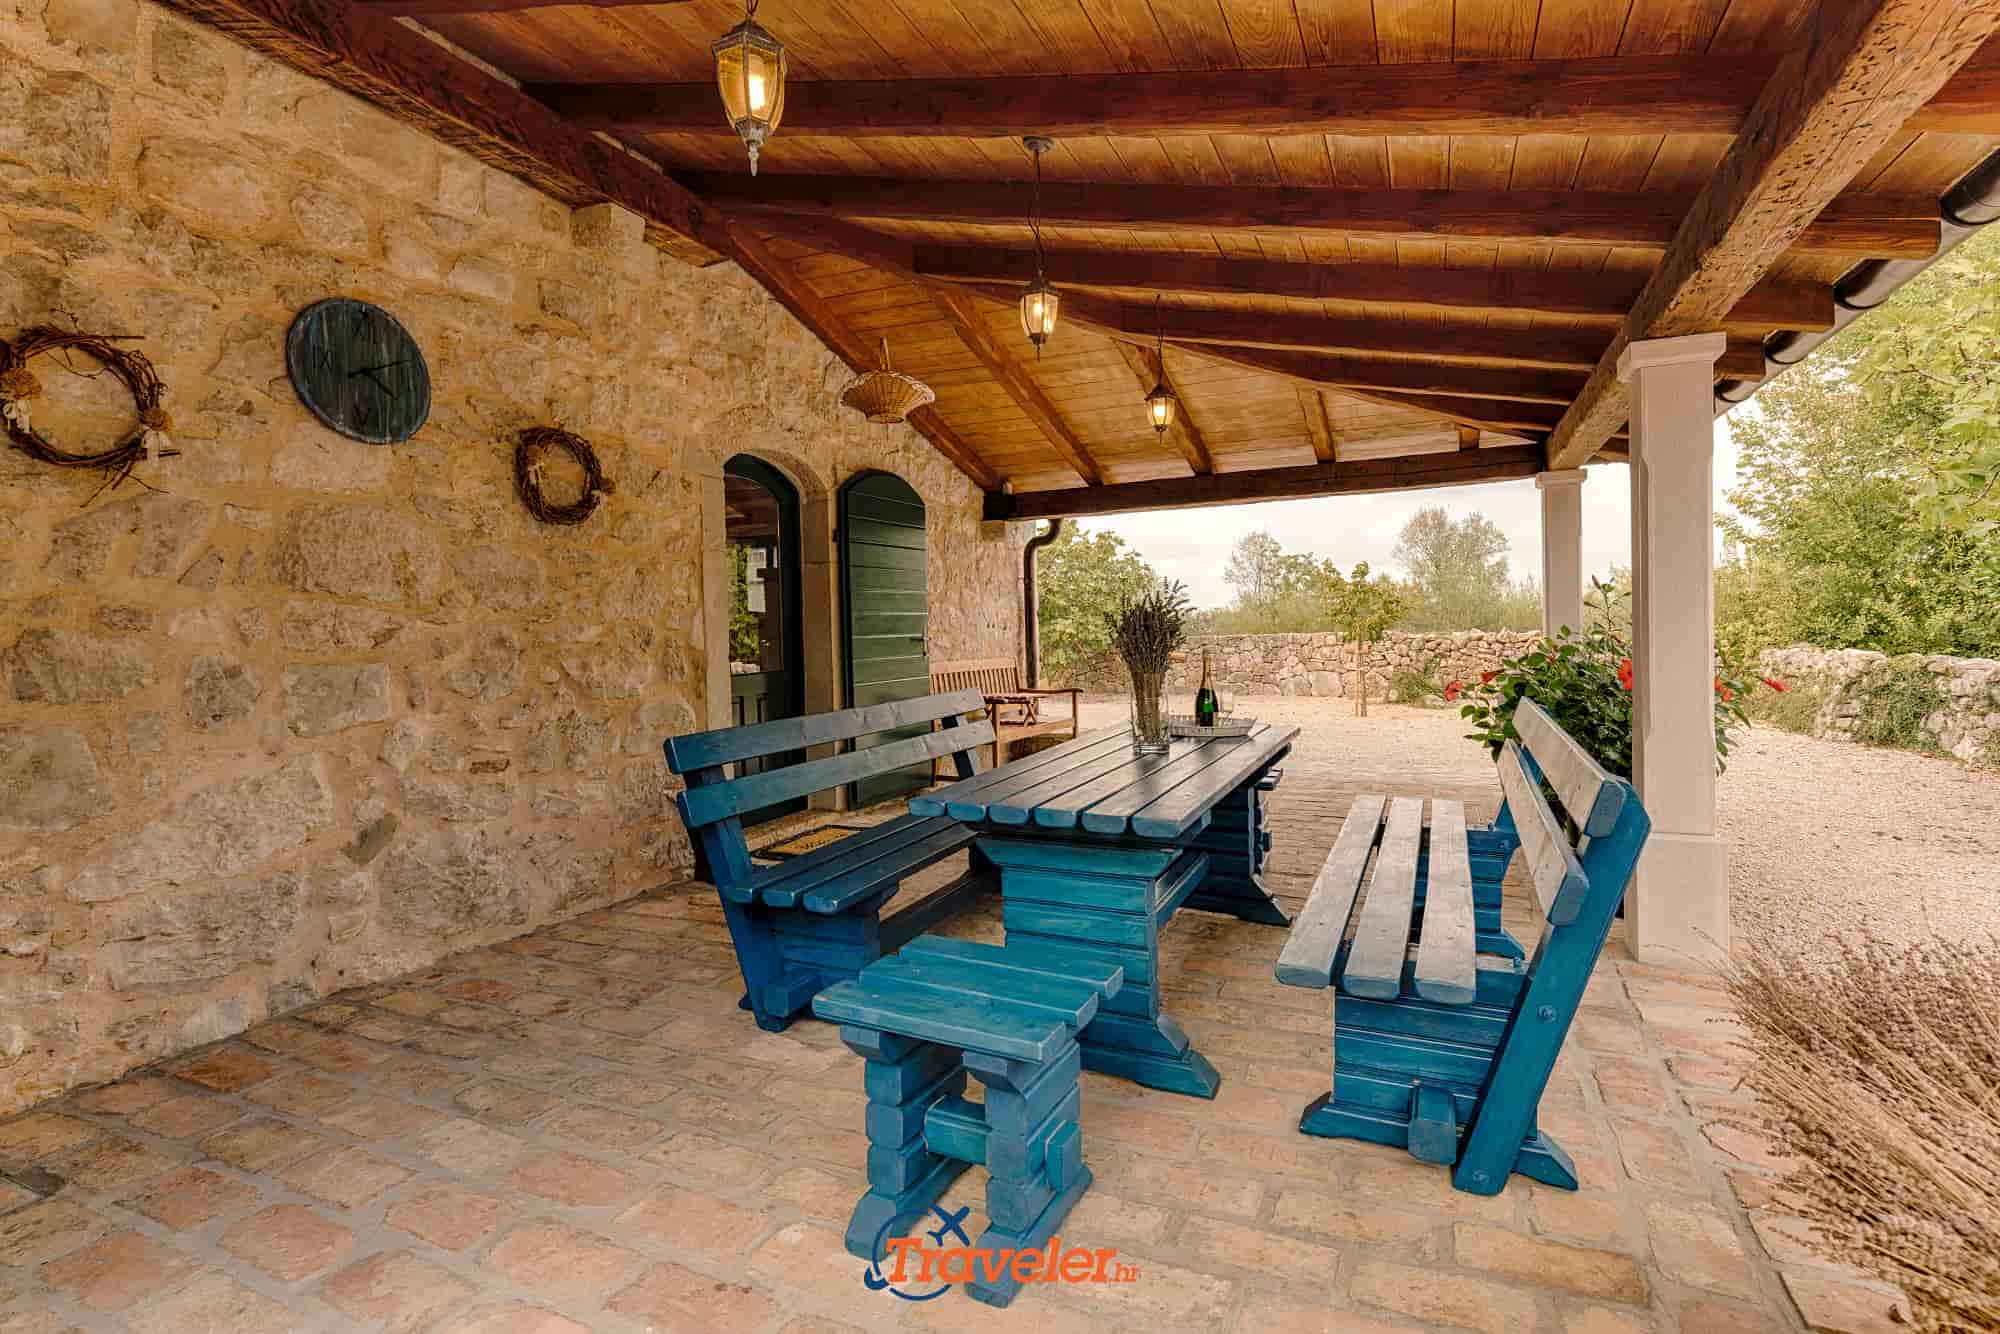 Holiday villa with pool in Croatia, wooden table and benches for dining